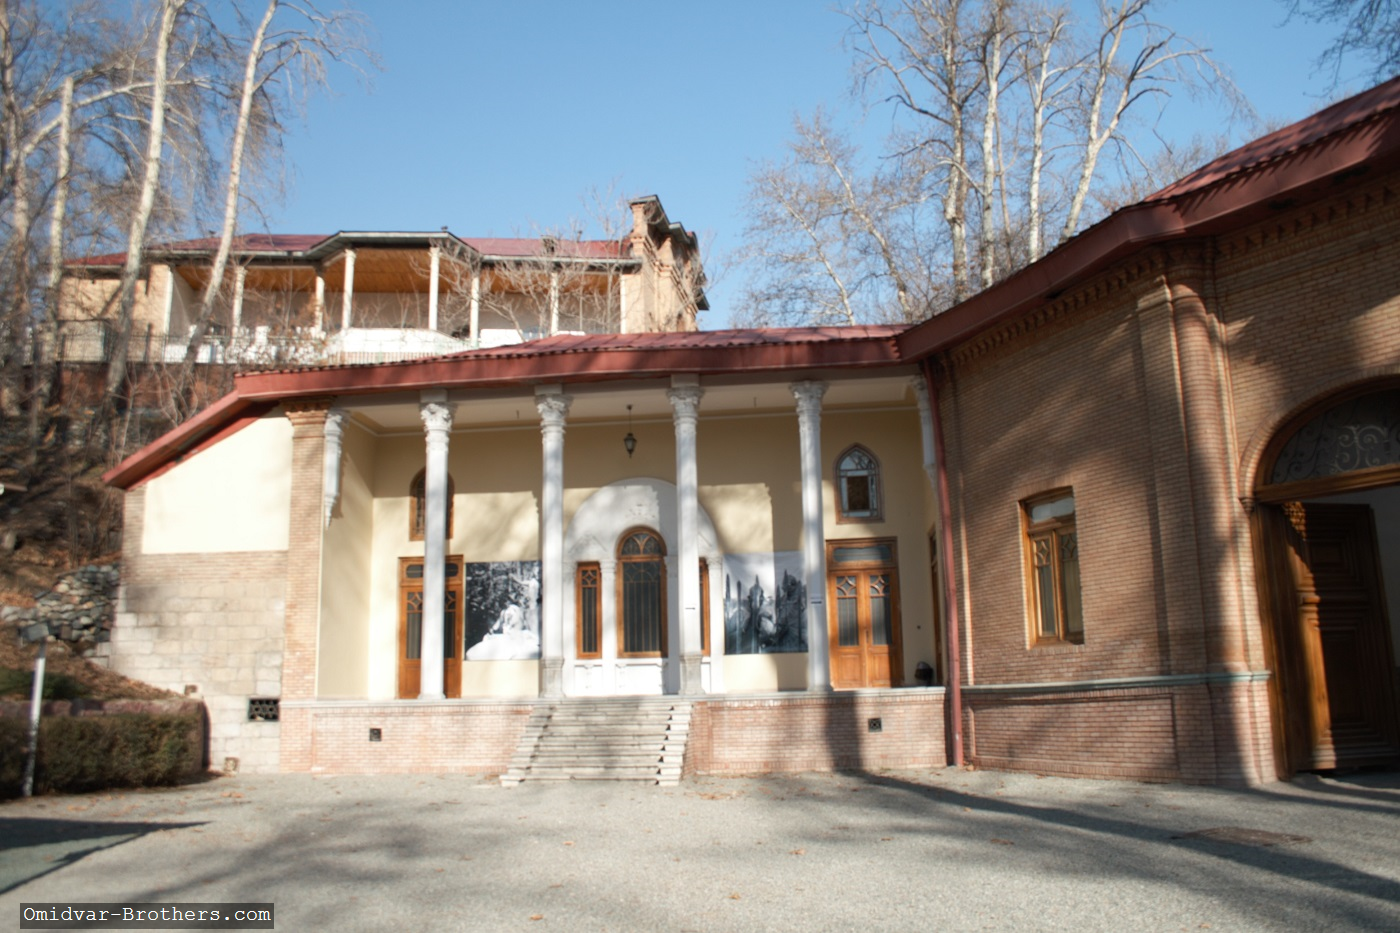  Museum of Omidvar Brothers